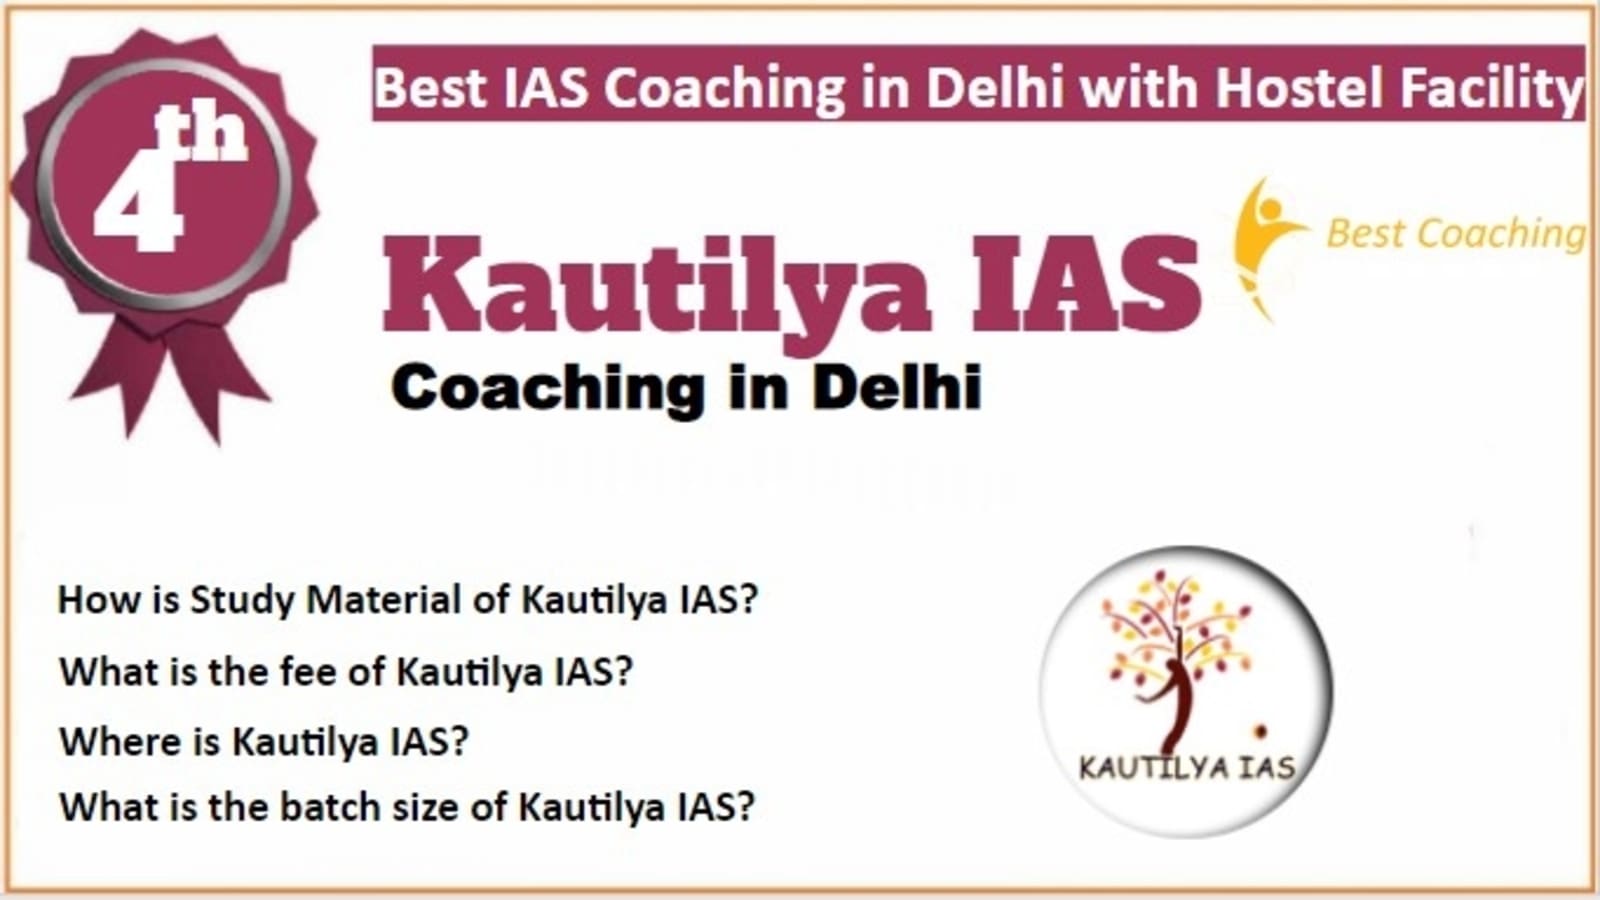 Rank 4 Best IAS Coaching in Delhi with Hostel Facility